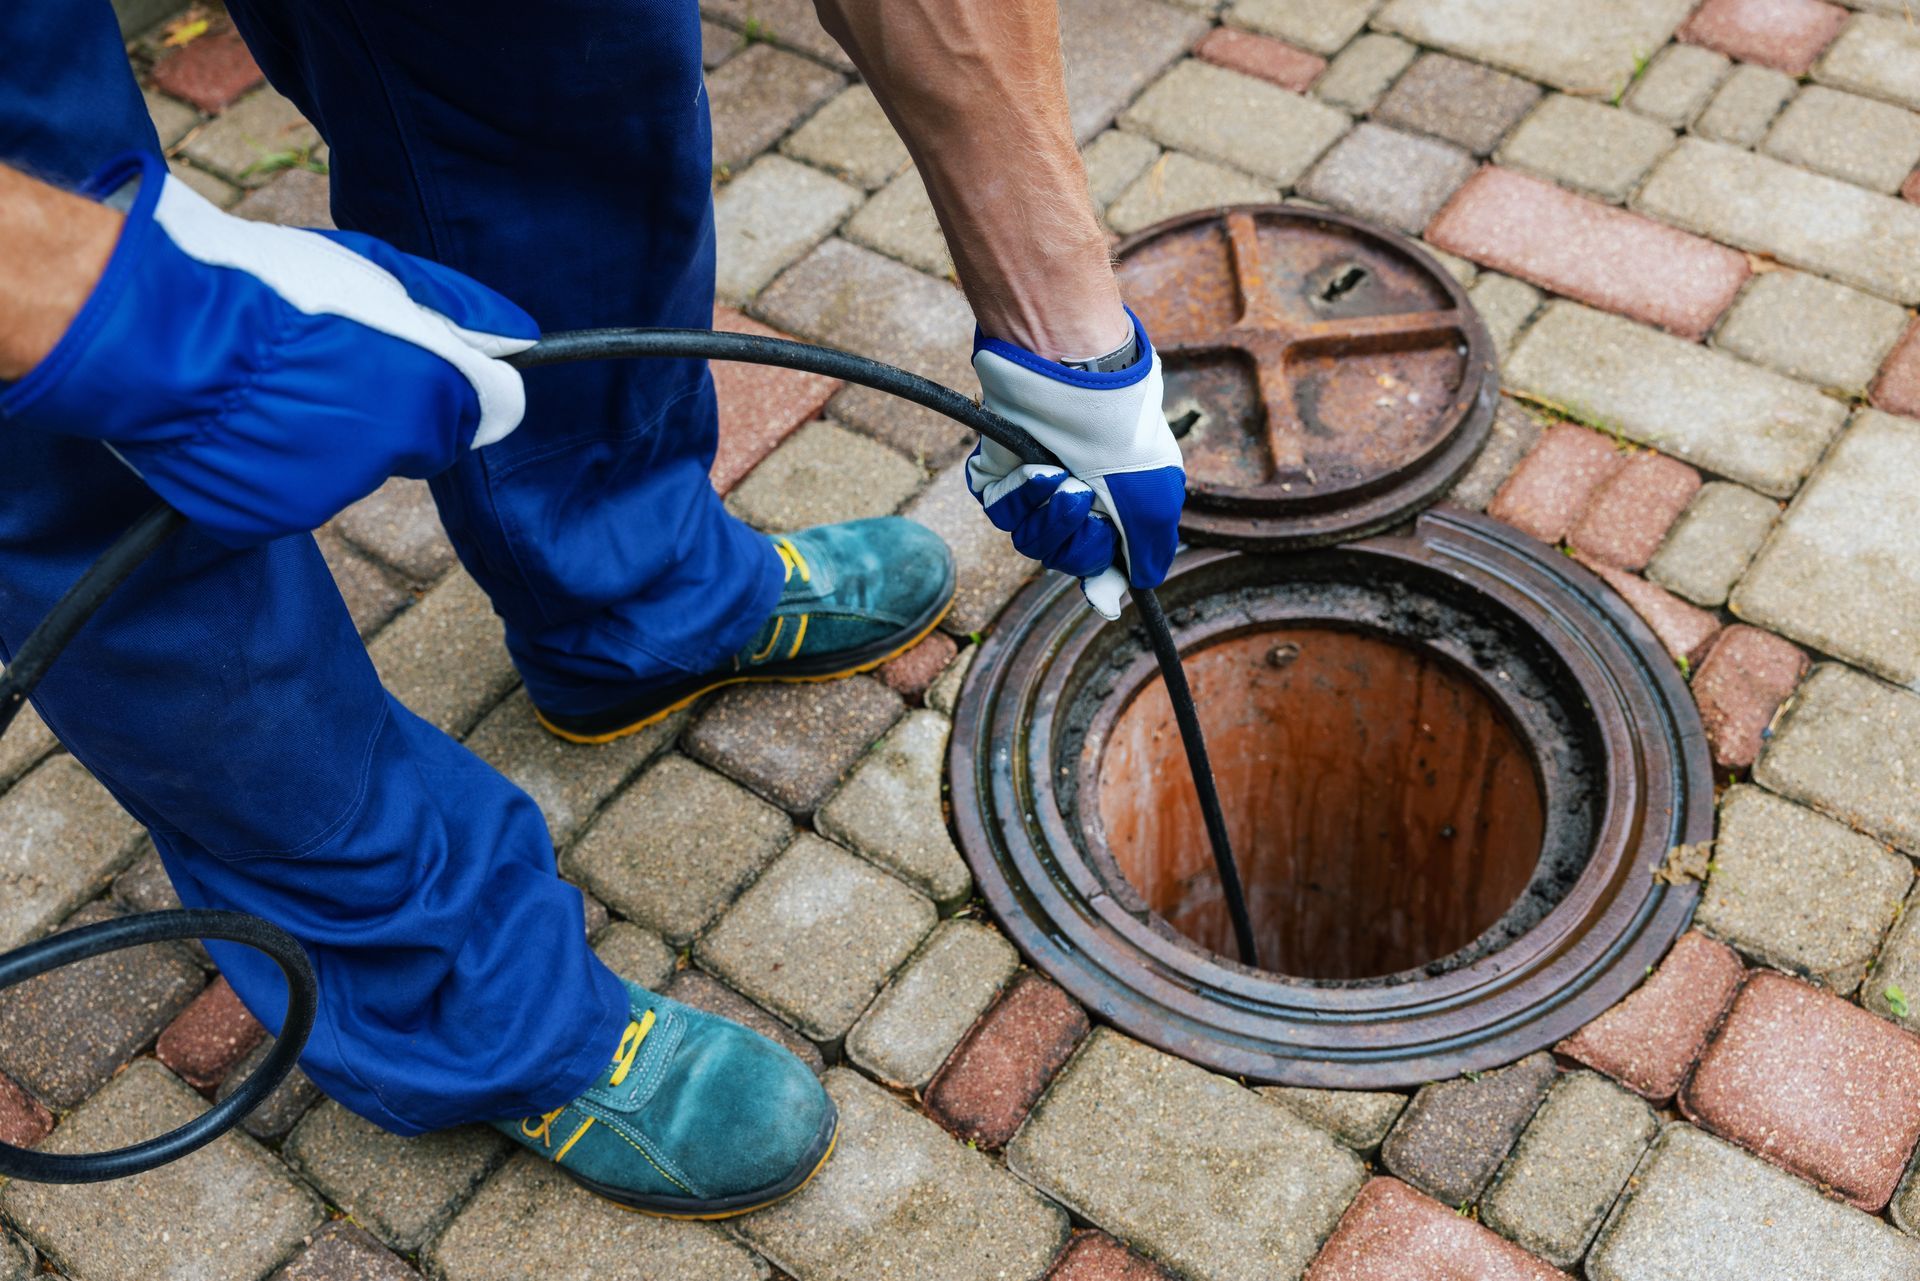 a man is using a hose to clean a manhole cover